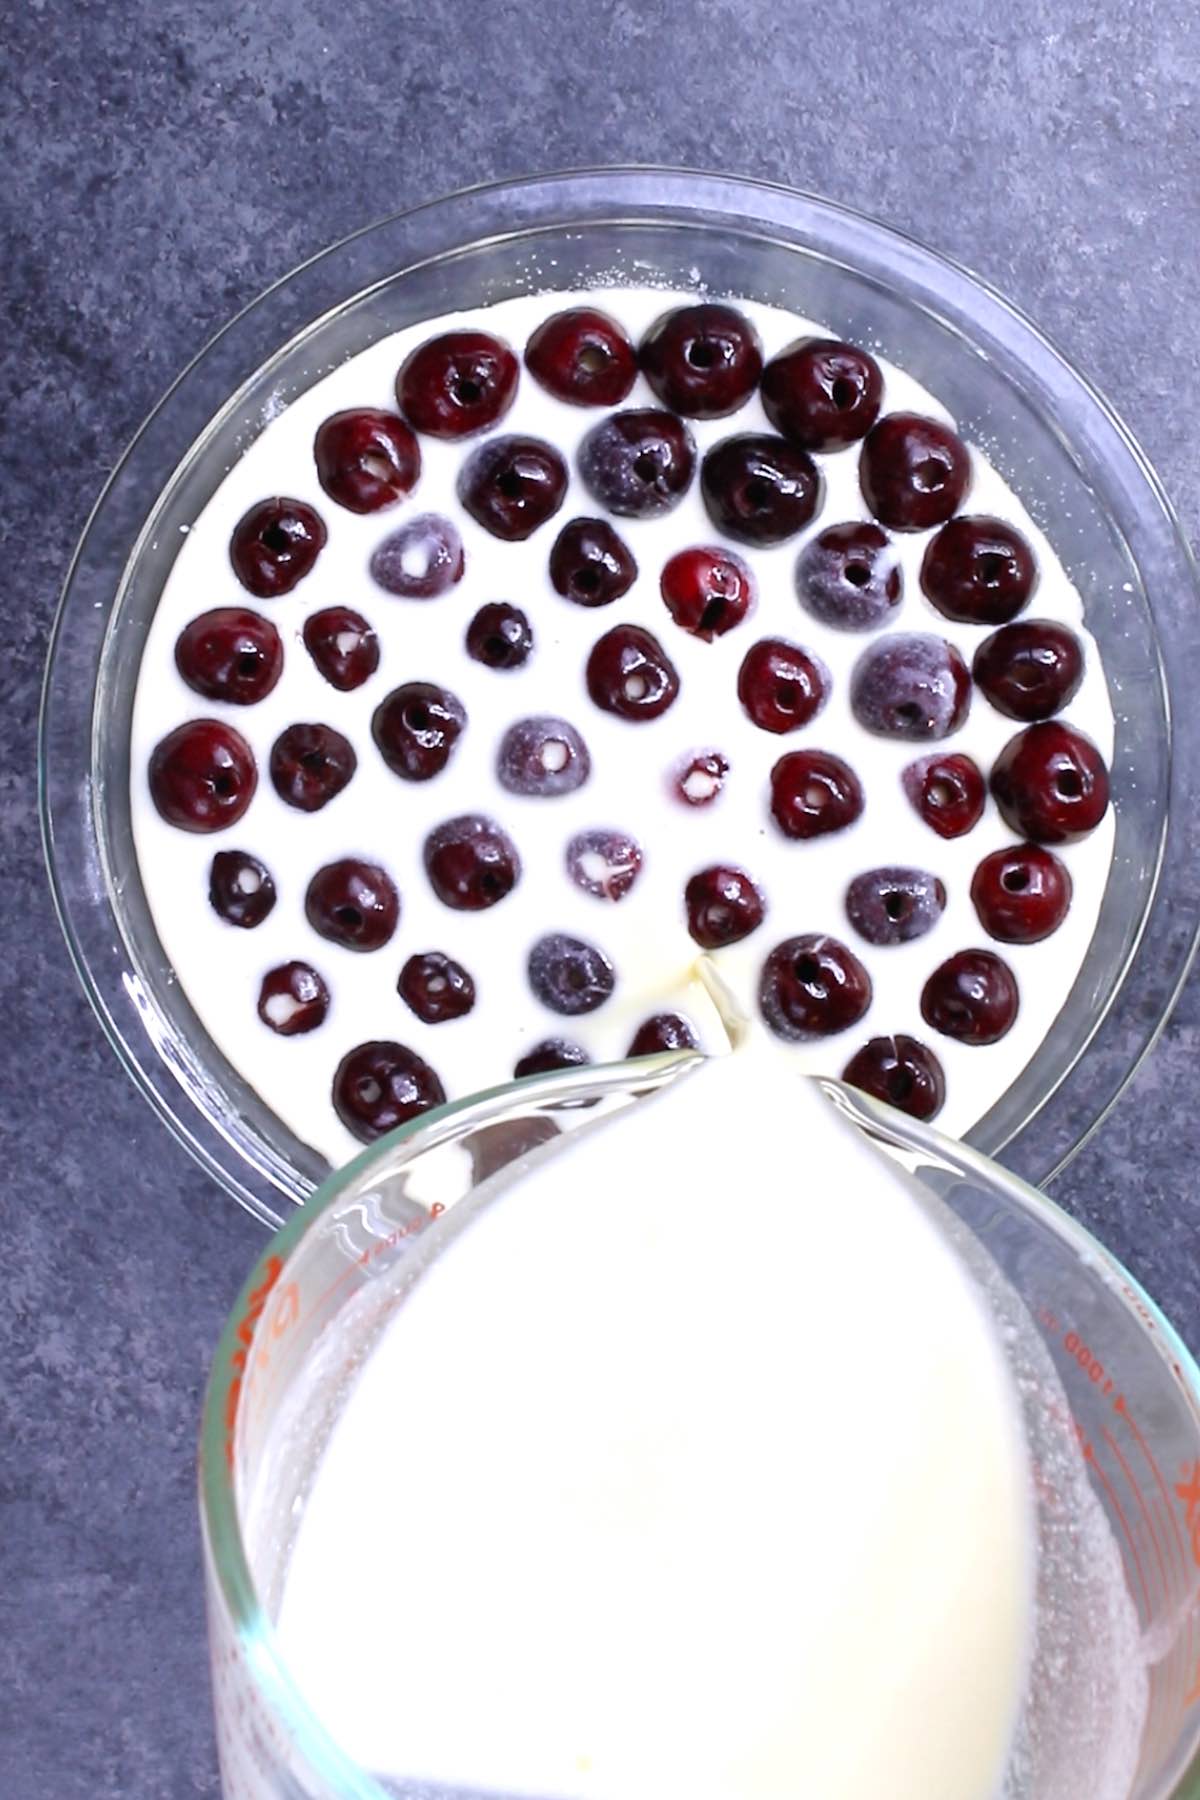 Overhead view of pouring batter on top of cherries when making a clafoutis